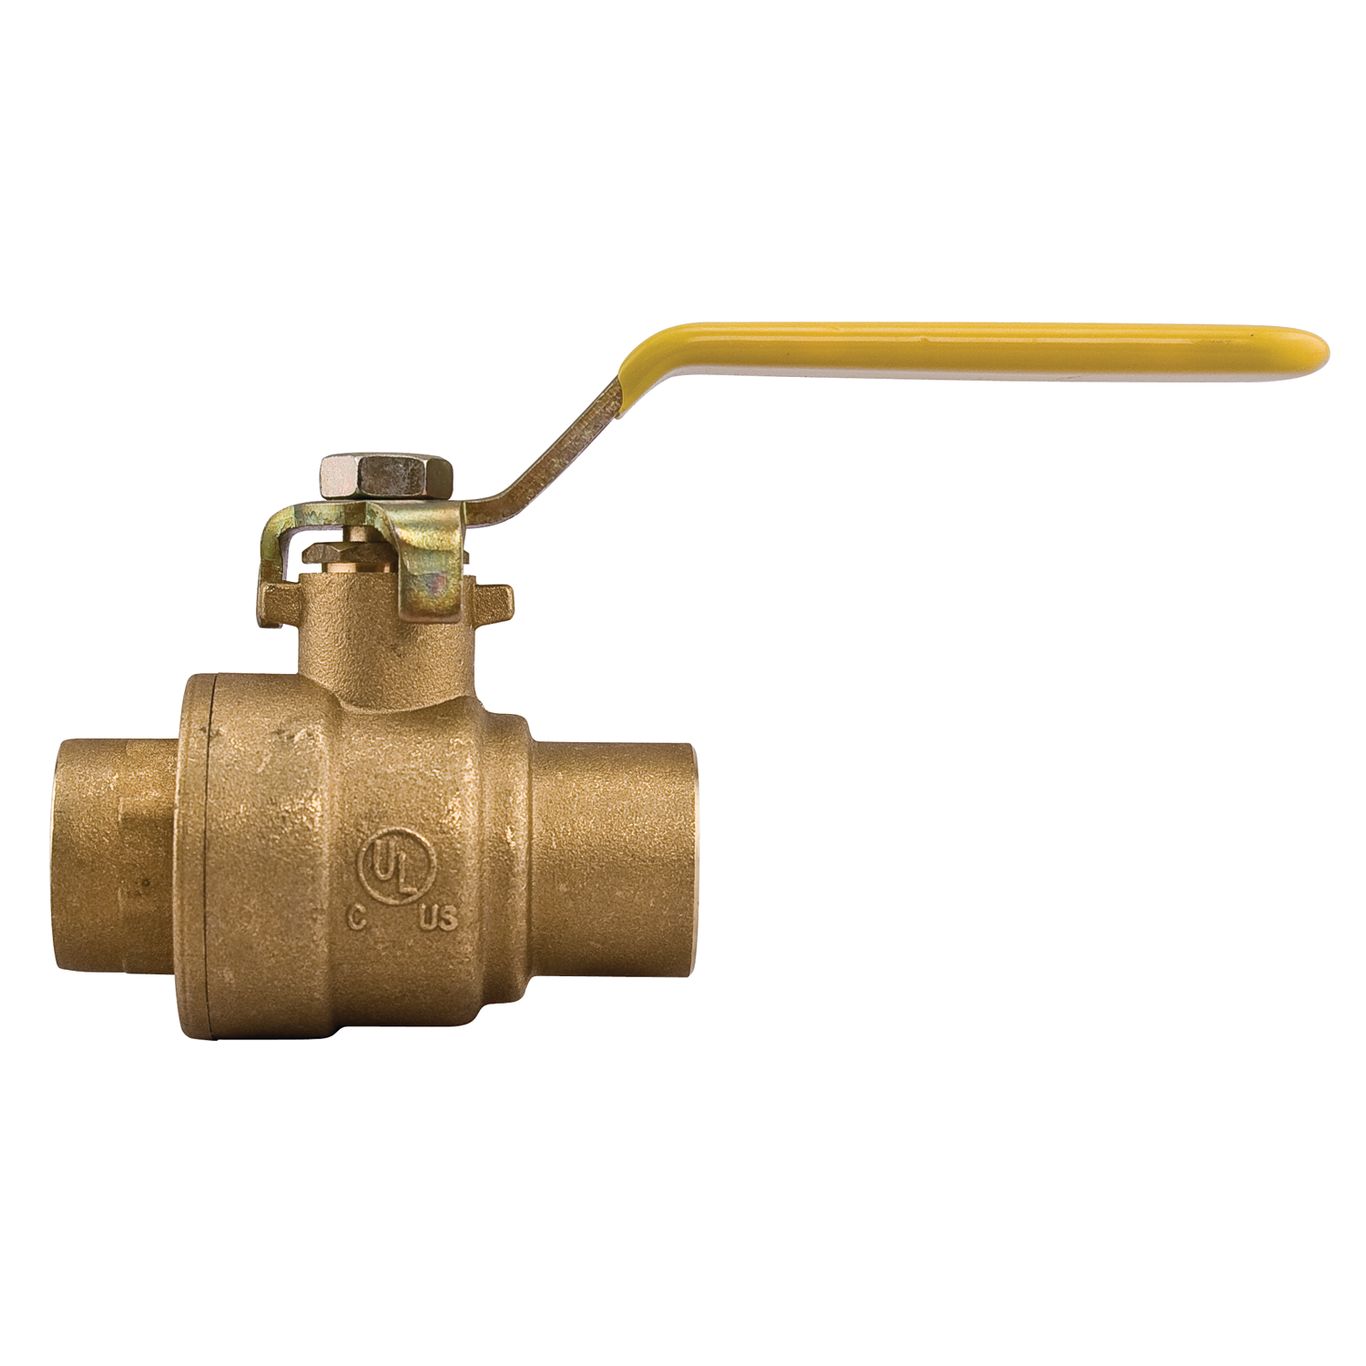 Watts 0547110 - 1/2 IN 2-Piece Full Port Brass Ball Valve, Solder End Connections, Lever Handle